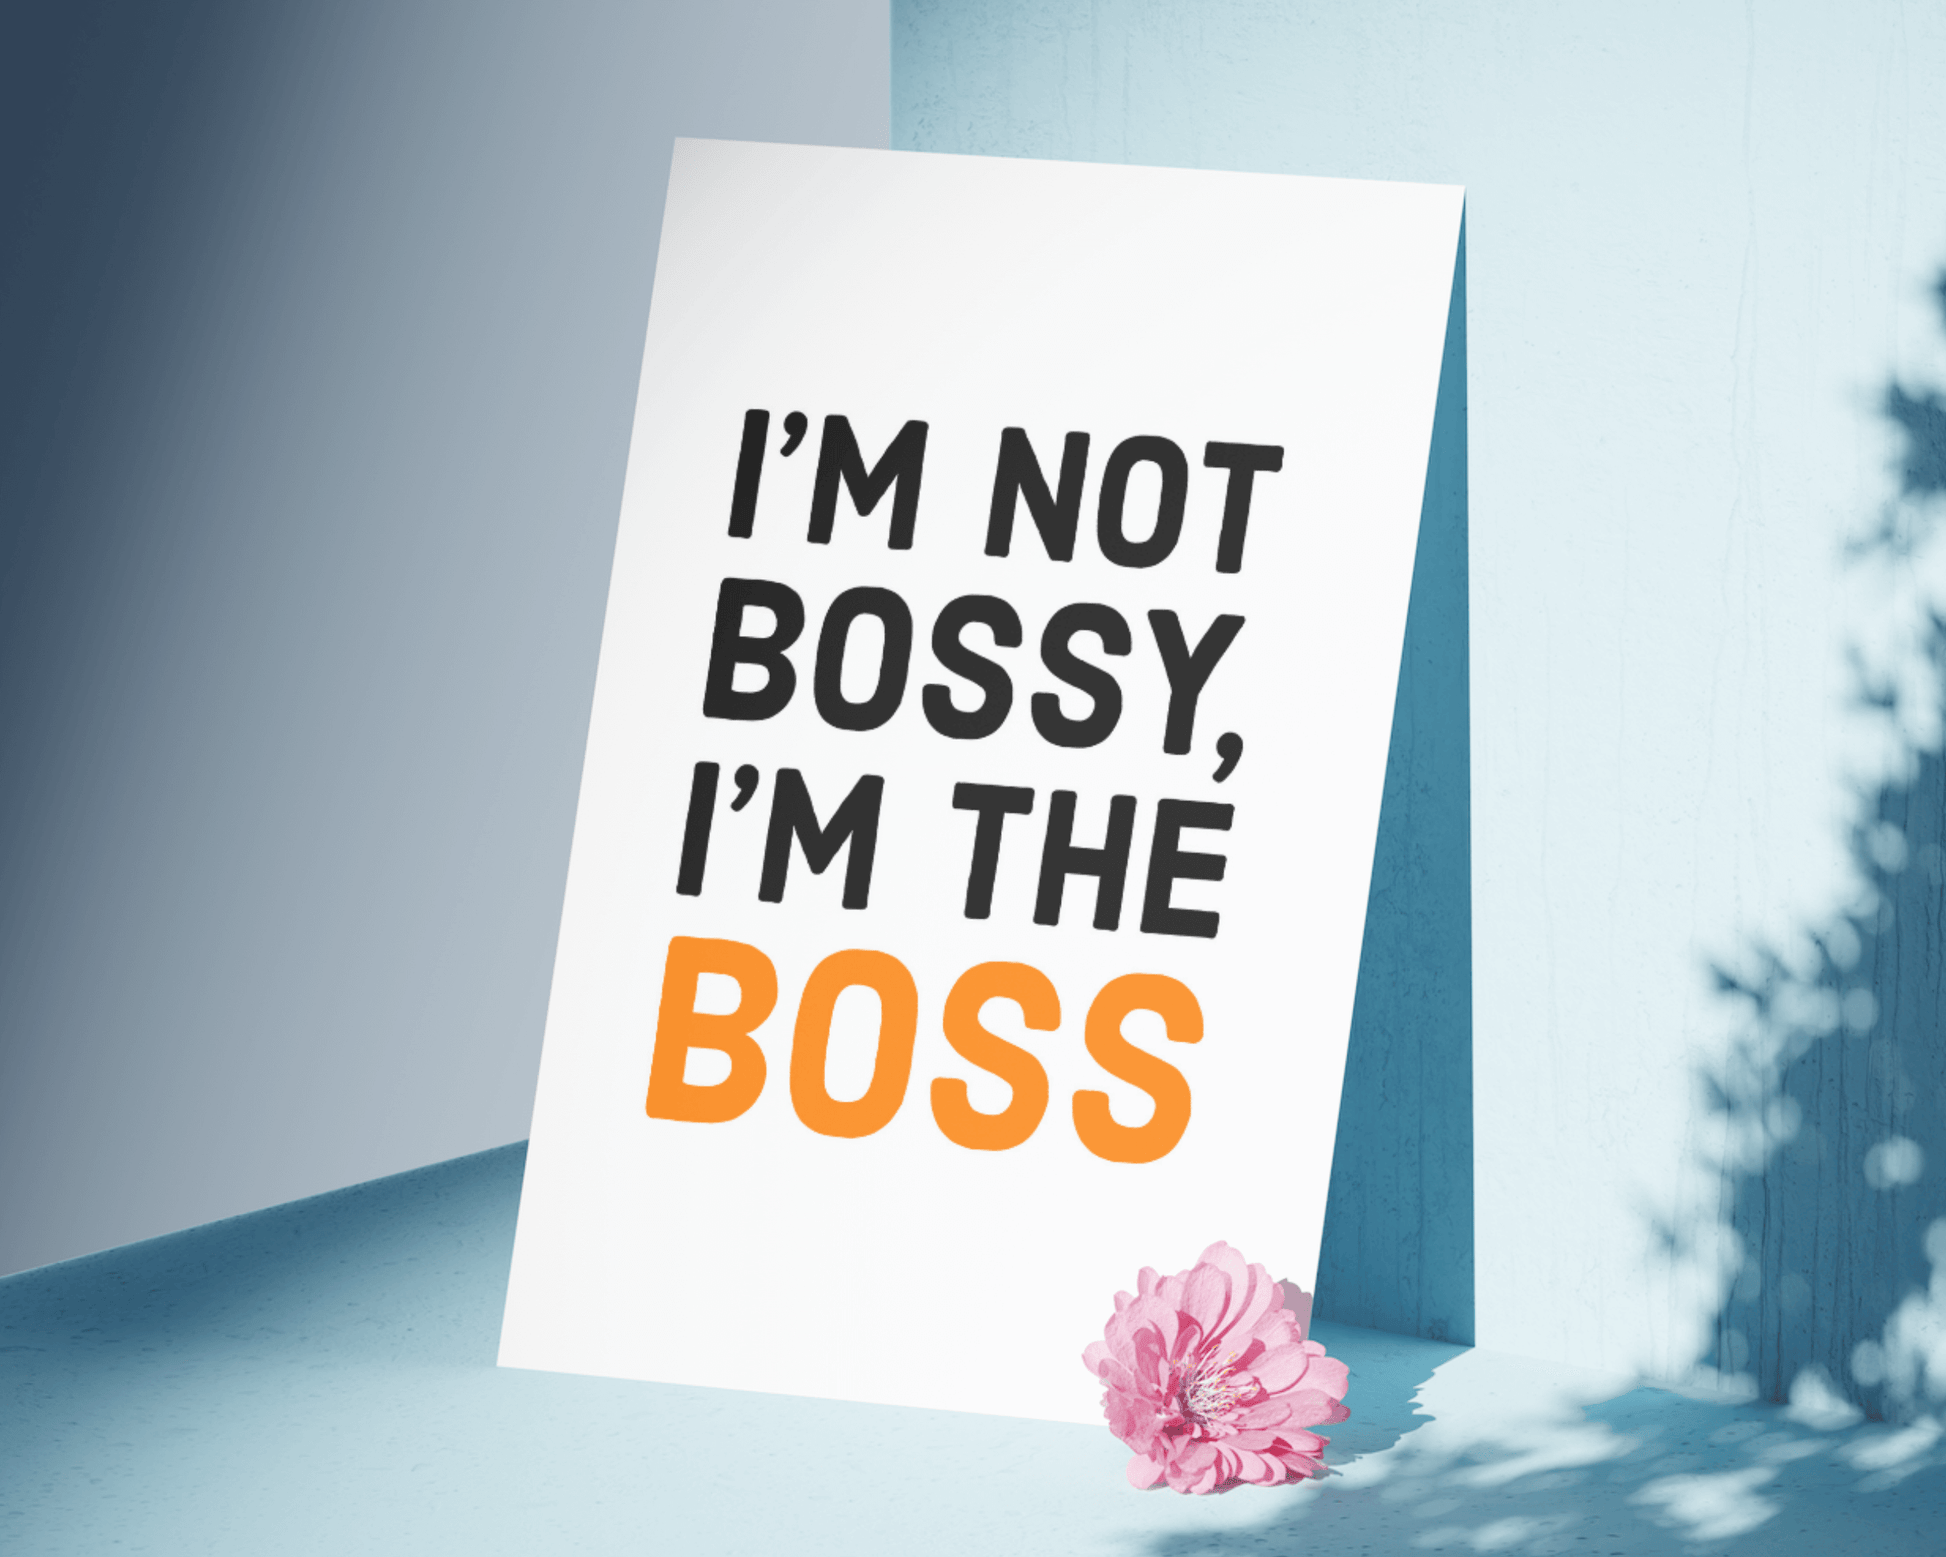 I'm Not Bossy, I'm the Boss Funny Manager Director Print Prints Moments That Unite